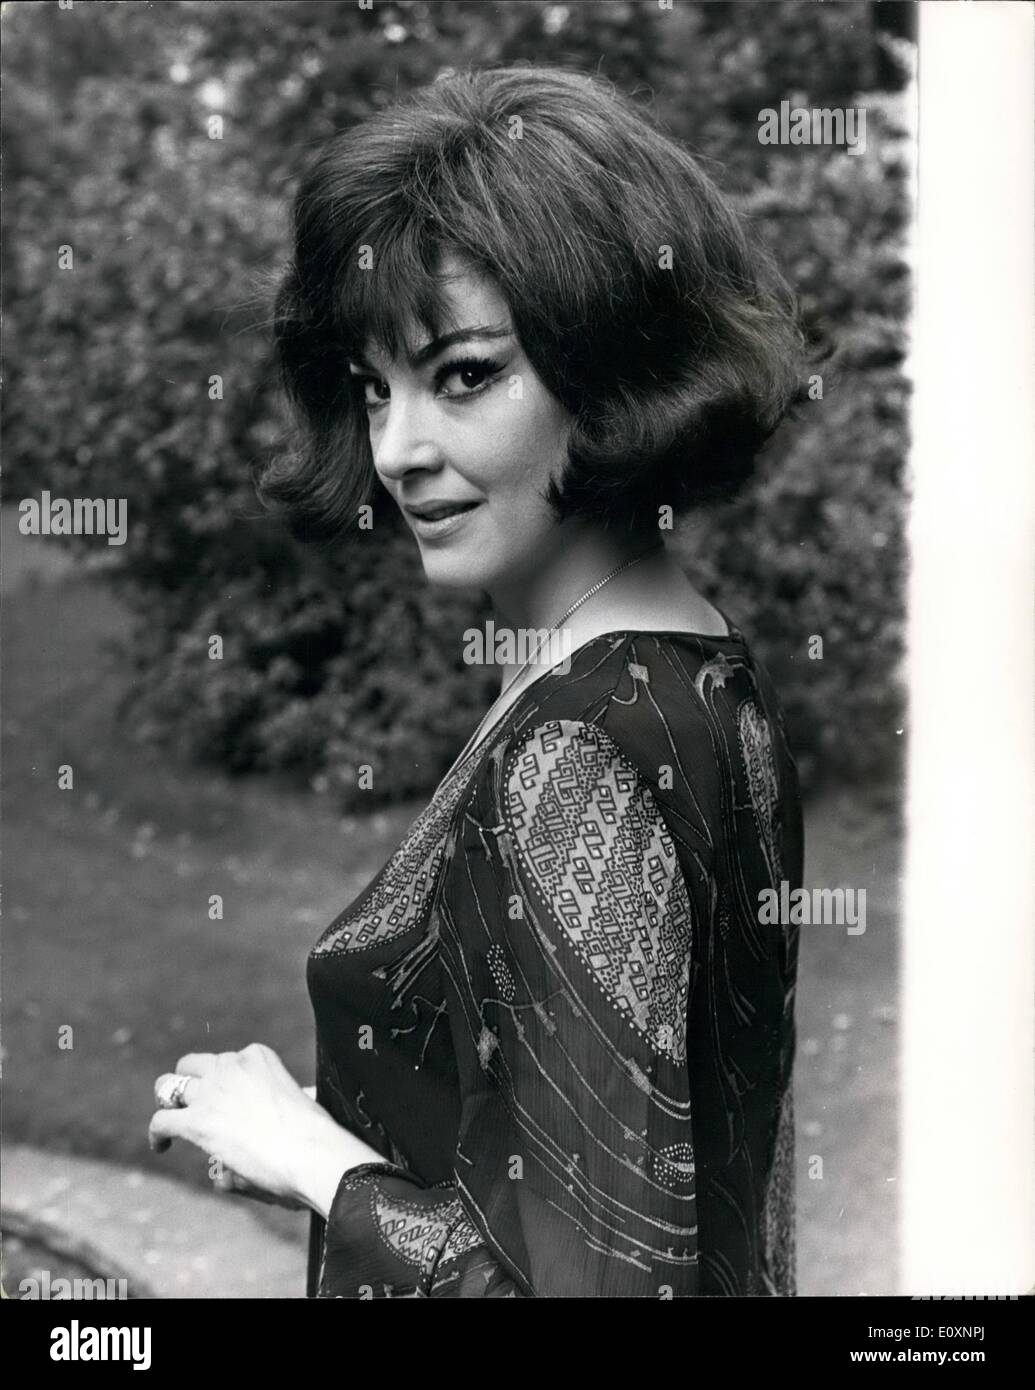 Jul. 07, 1967 - Reception for Italian opera star. Miss Anna Moffo, the lovely Italian Opera singer, attended a press conference reception at the Savoy Hotel. Miss Moffo, who arrived in London today, has sung leading roles at La Soala, Milan, the Metropolitan New York, and Covent Garden, and she also stars in the film La Traviata , which was produced by her husband Mario Lanfrachi. Photo Shows: Italian Opera Star Anna Moffo pictured in the Savoy Gardens this evening. Keystone Stock Photo